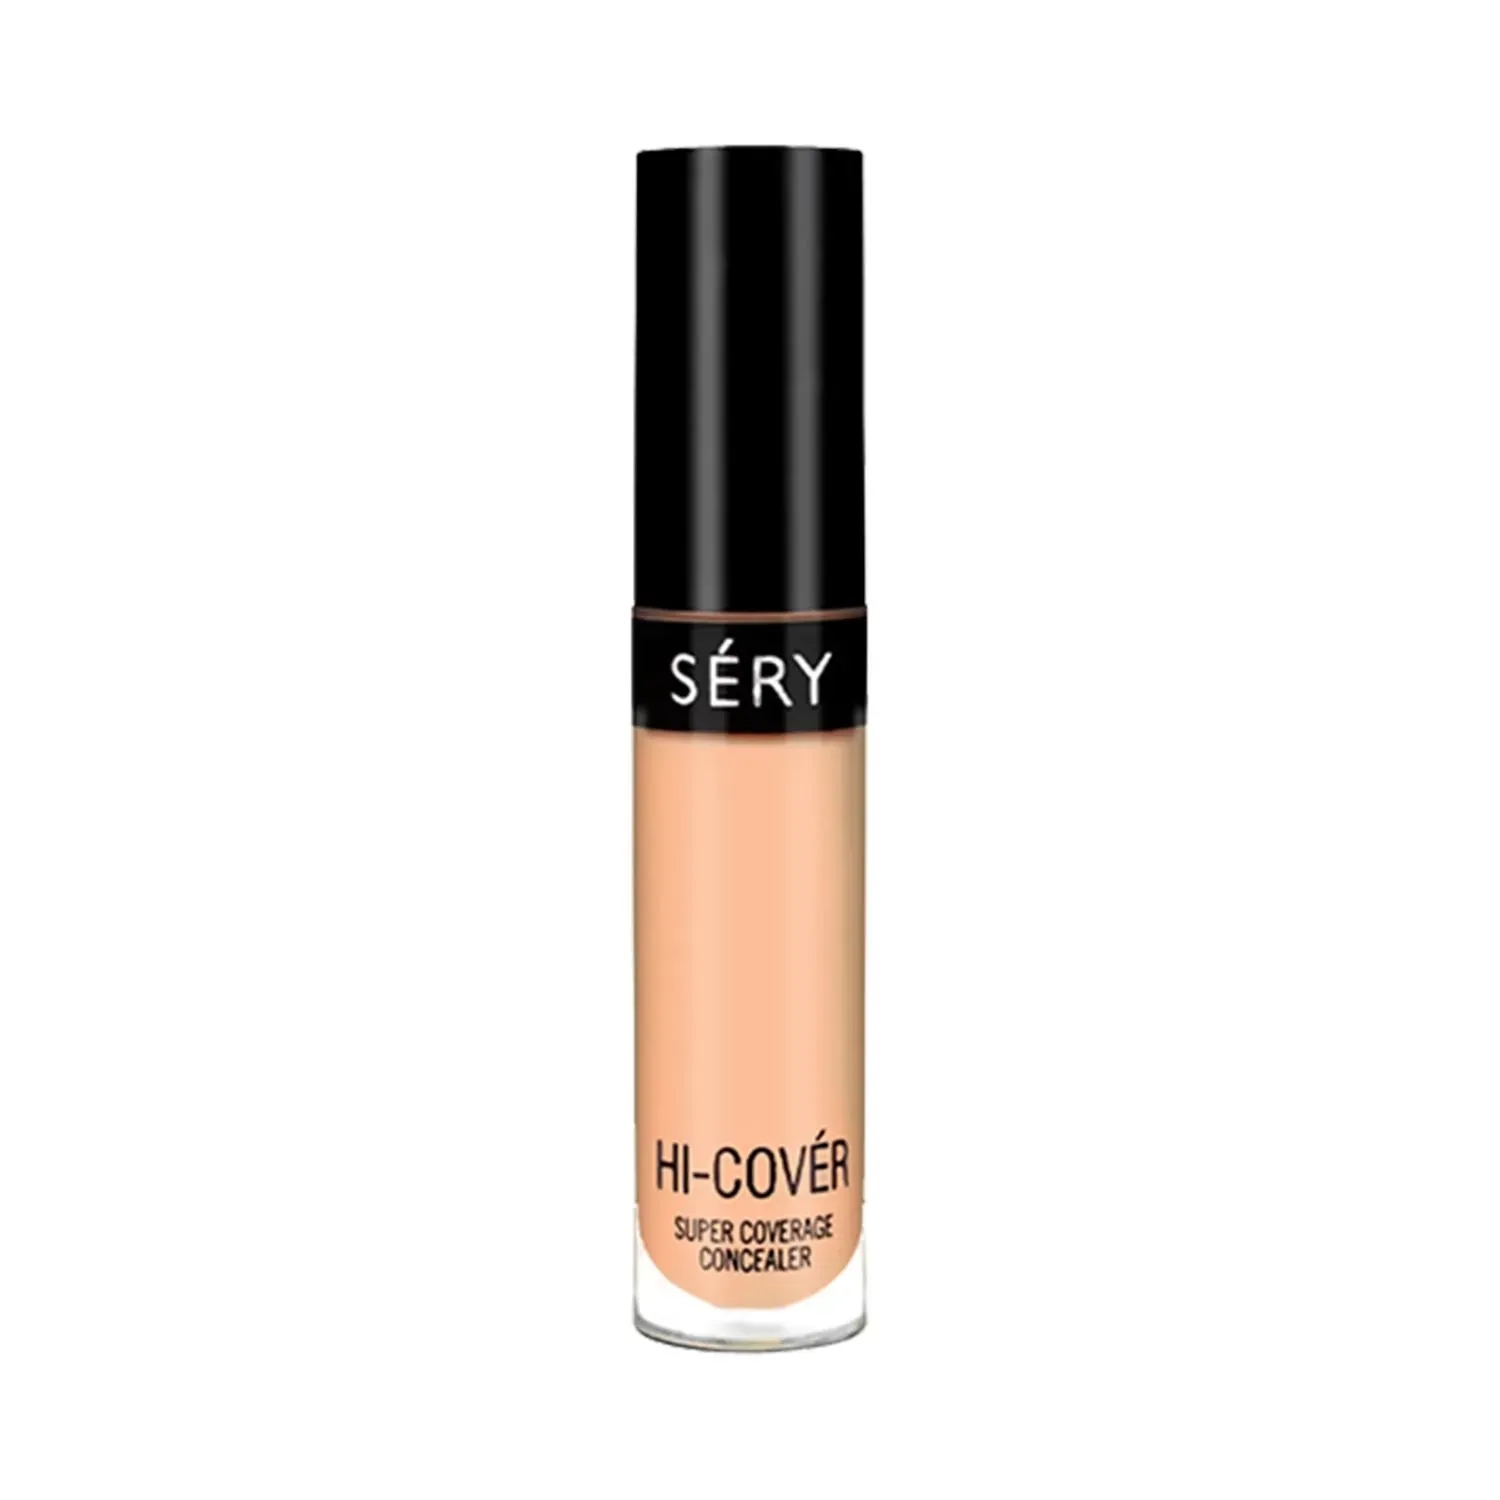 Sery | Sery Hi-Cover Super Coverage Concealer - Natural (5ml)